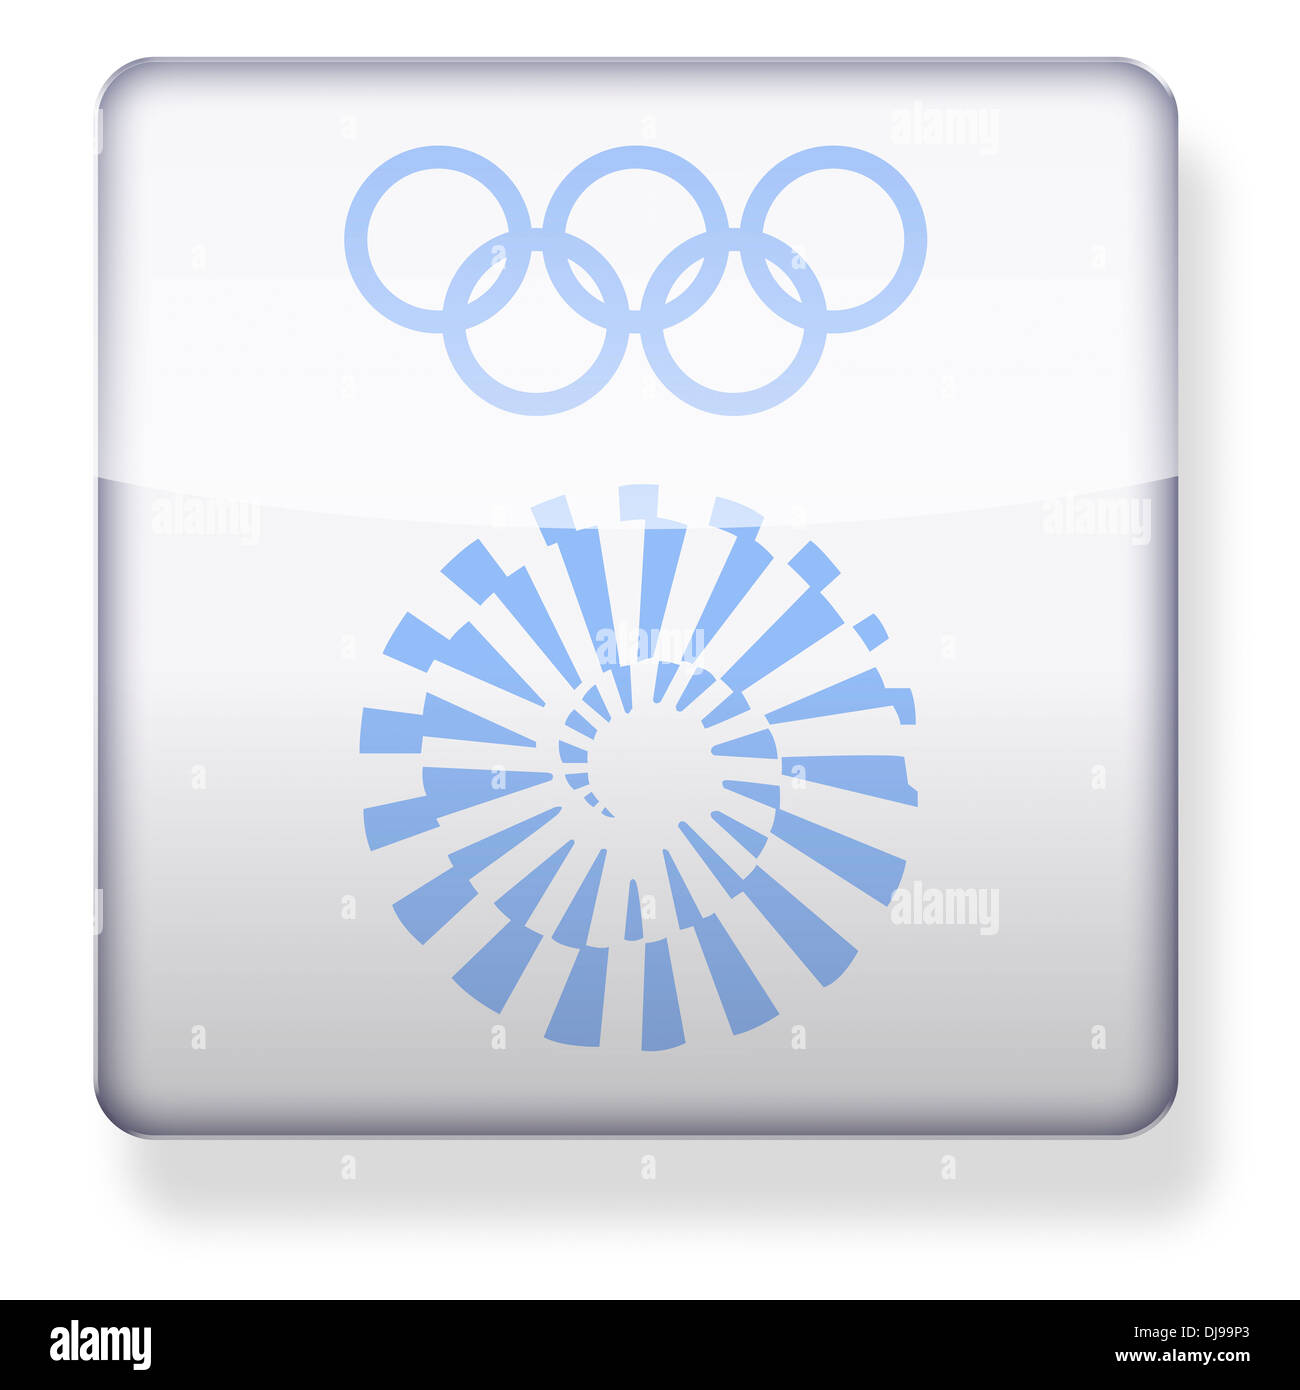 Munich 1972 Olympics logo as an app icon. Clipping path included. Stock Photo